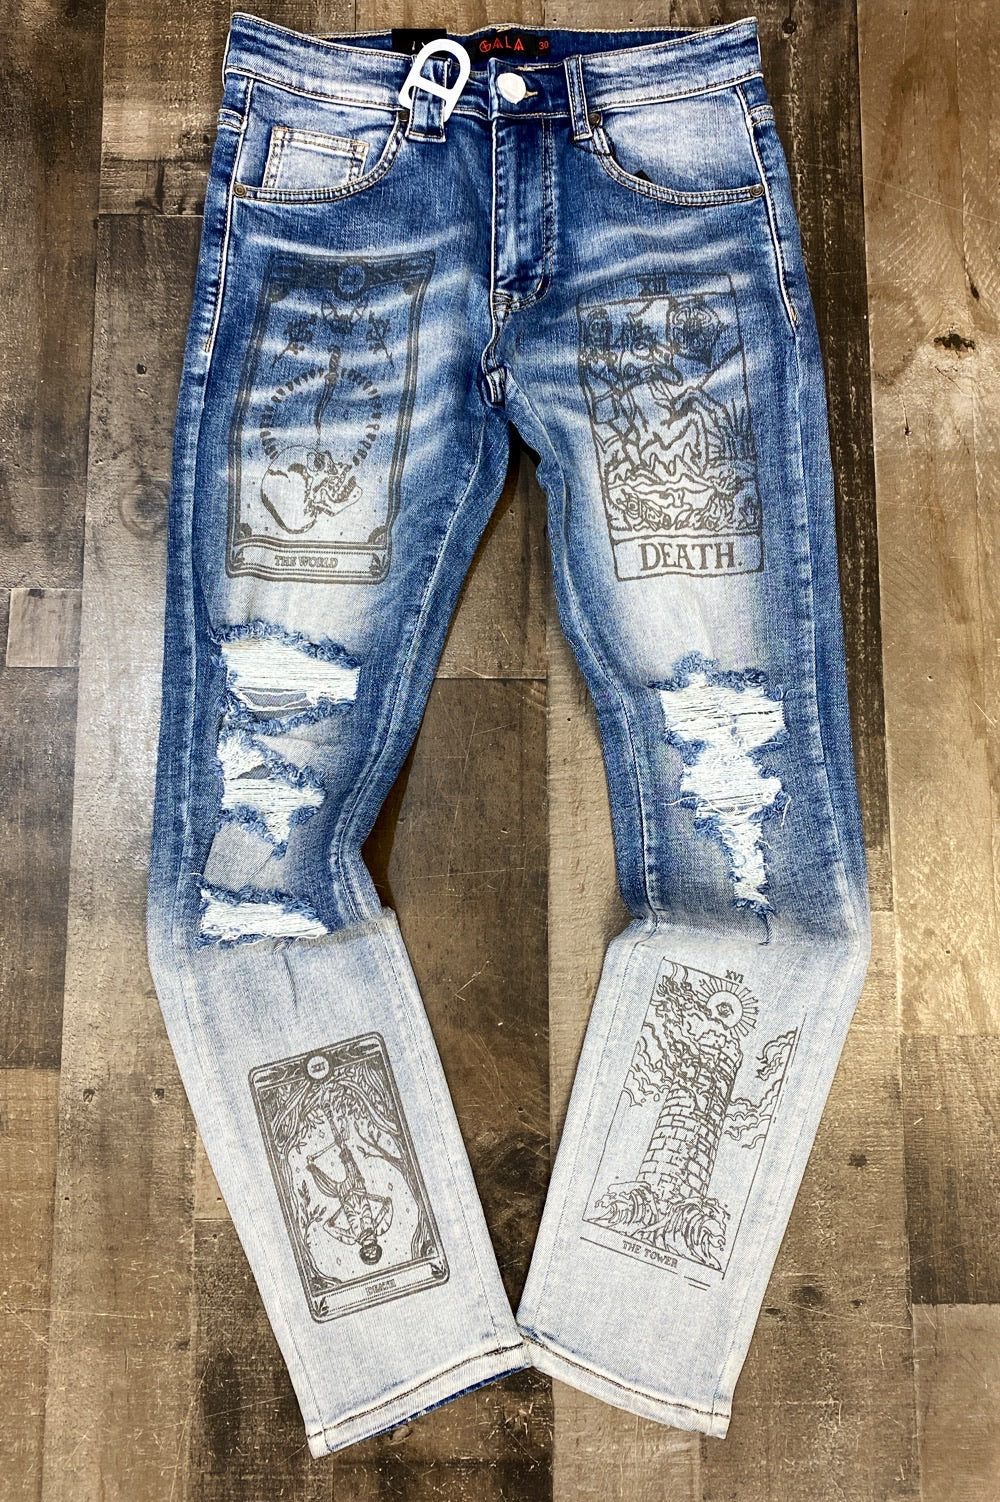 Gala- blue graphic jeans